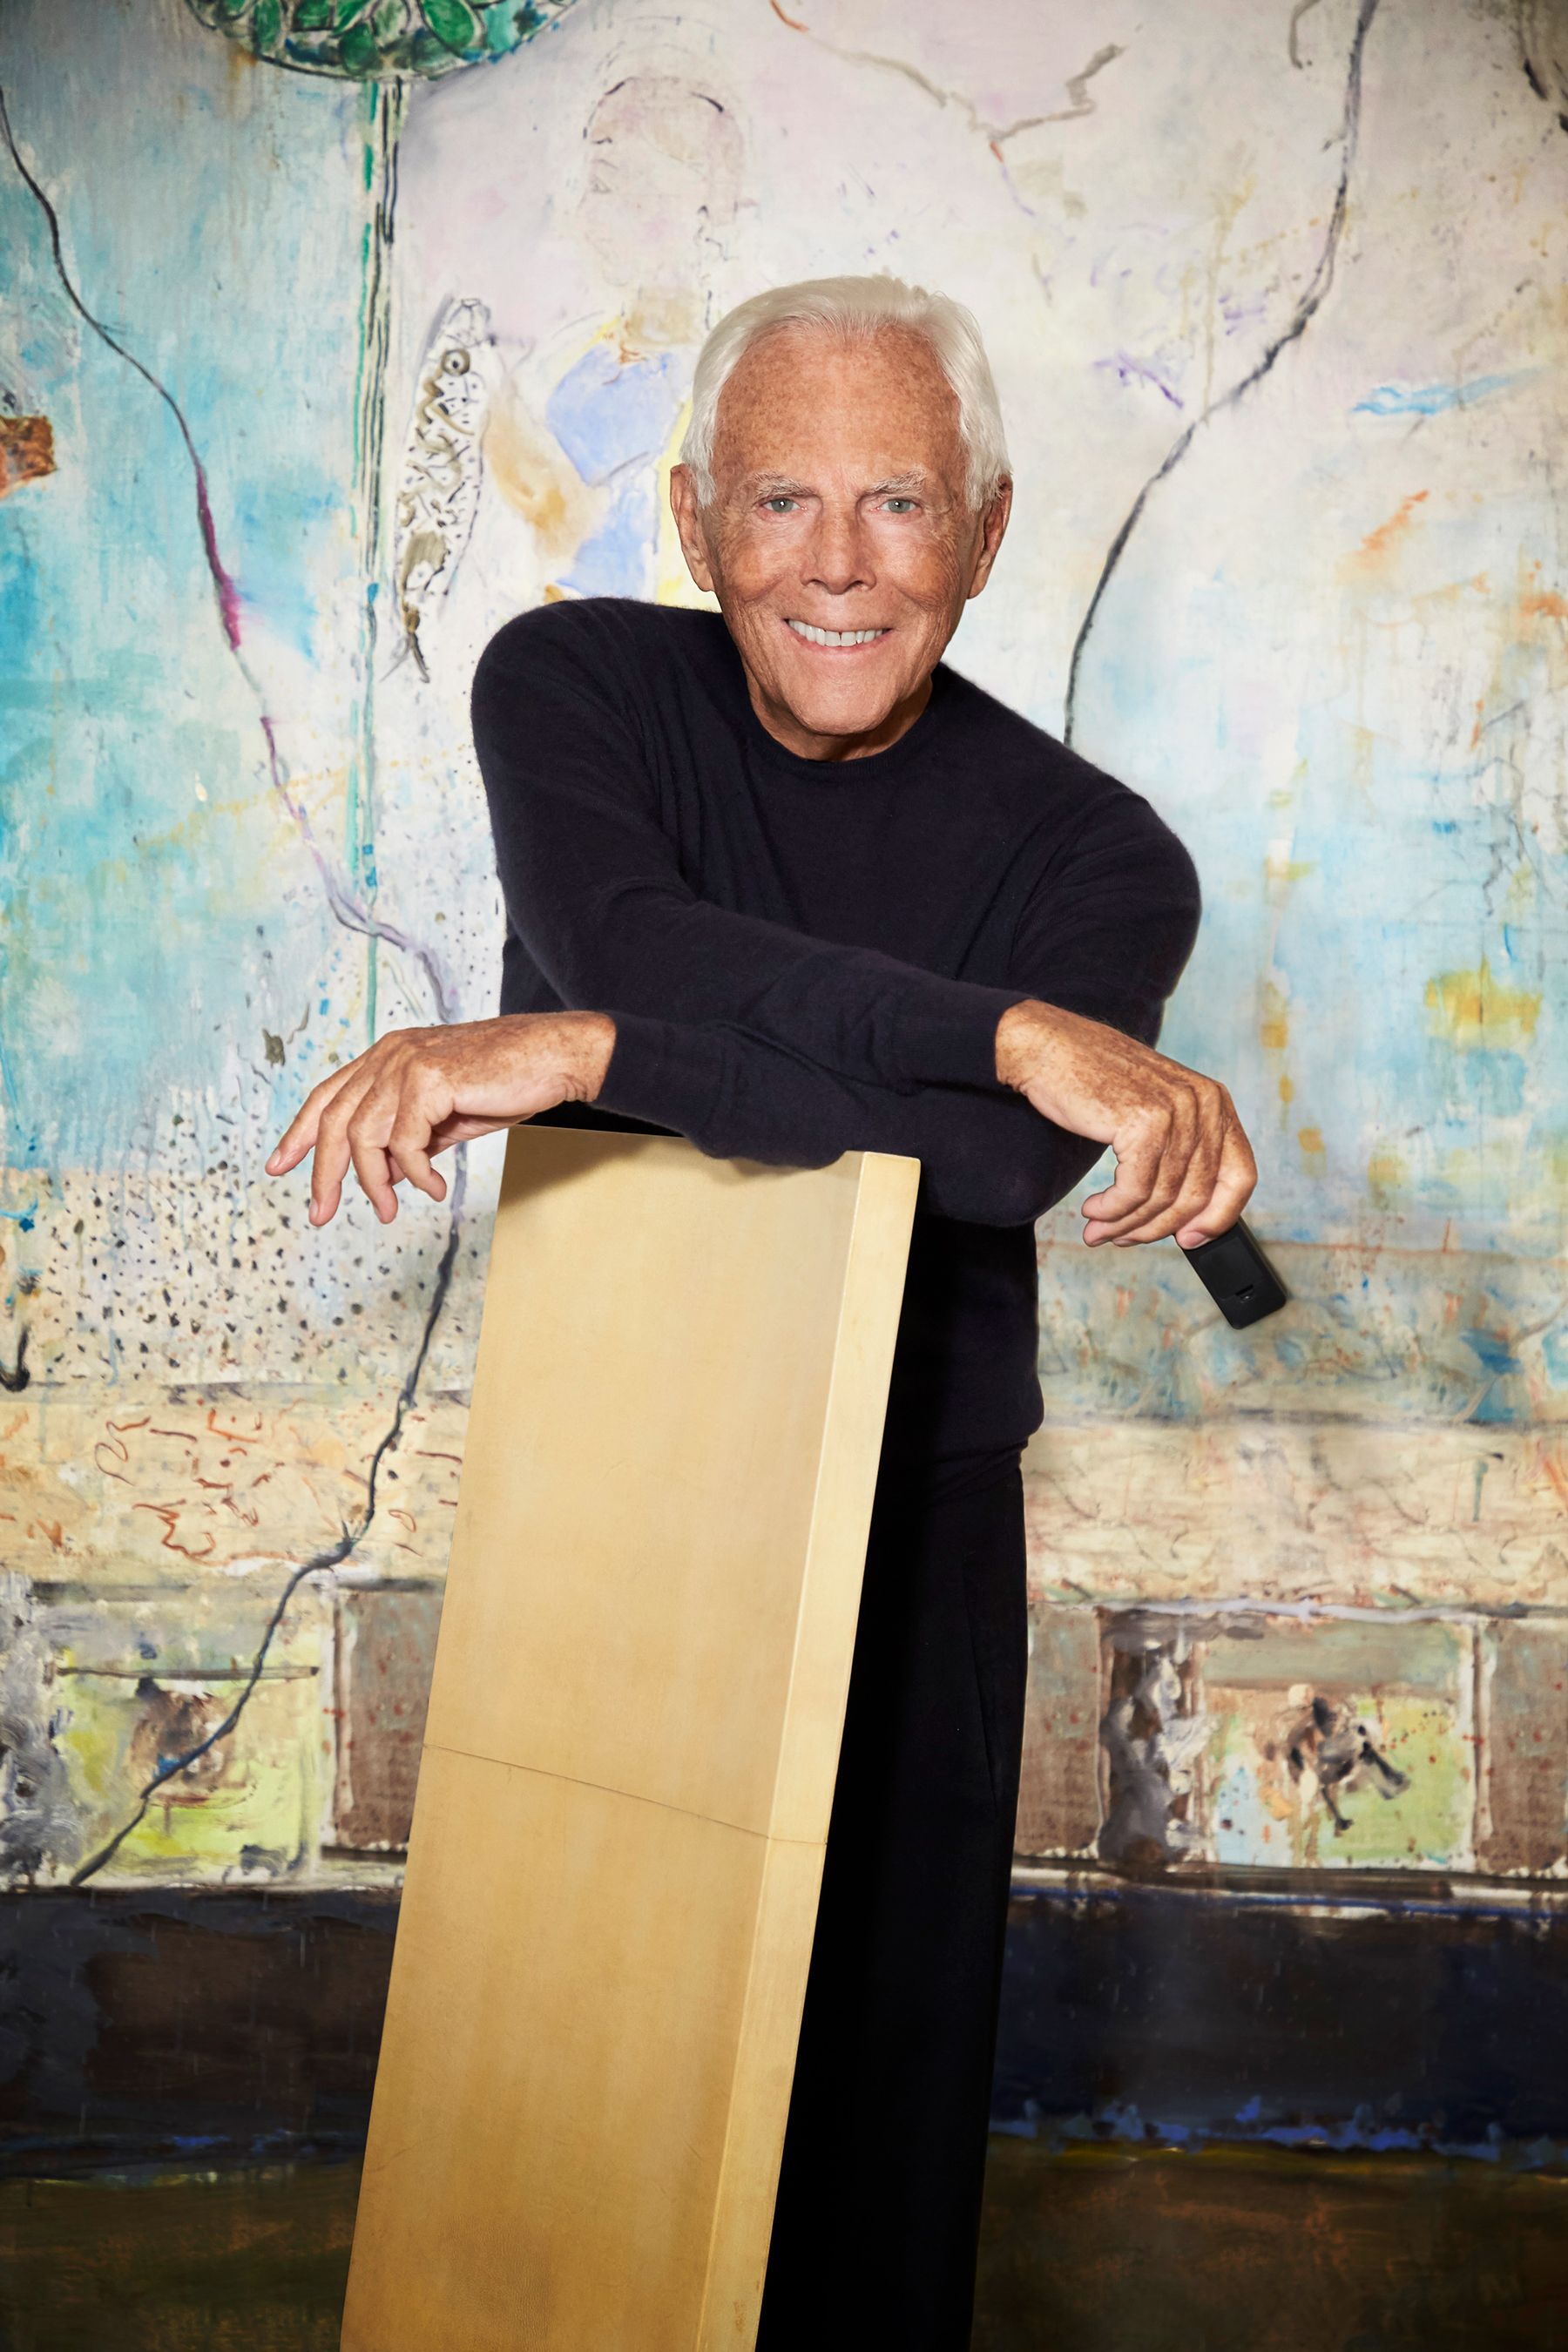 Interview Giorgio Armani About His Career & Legacy